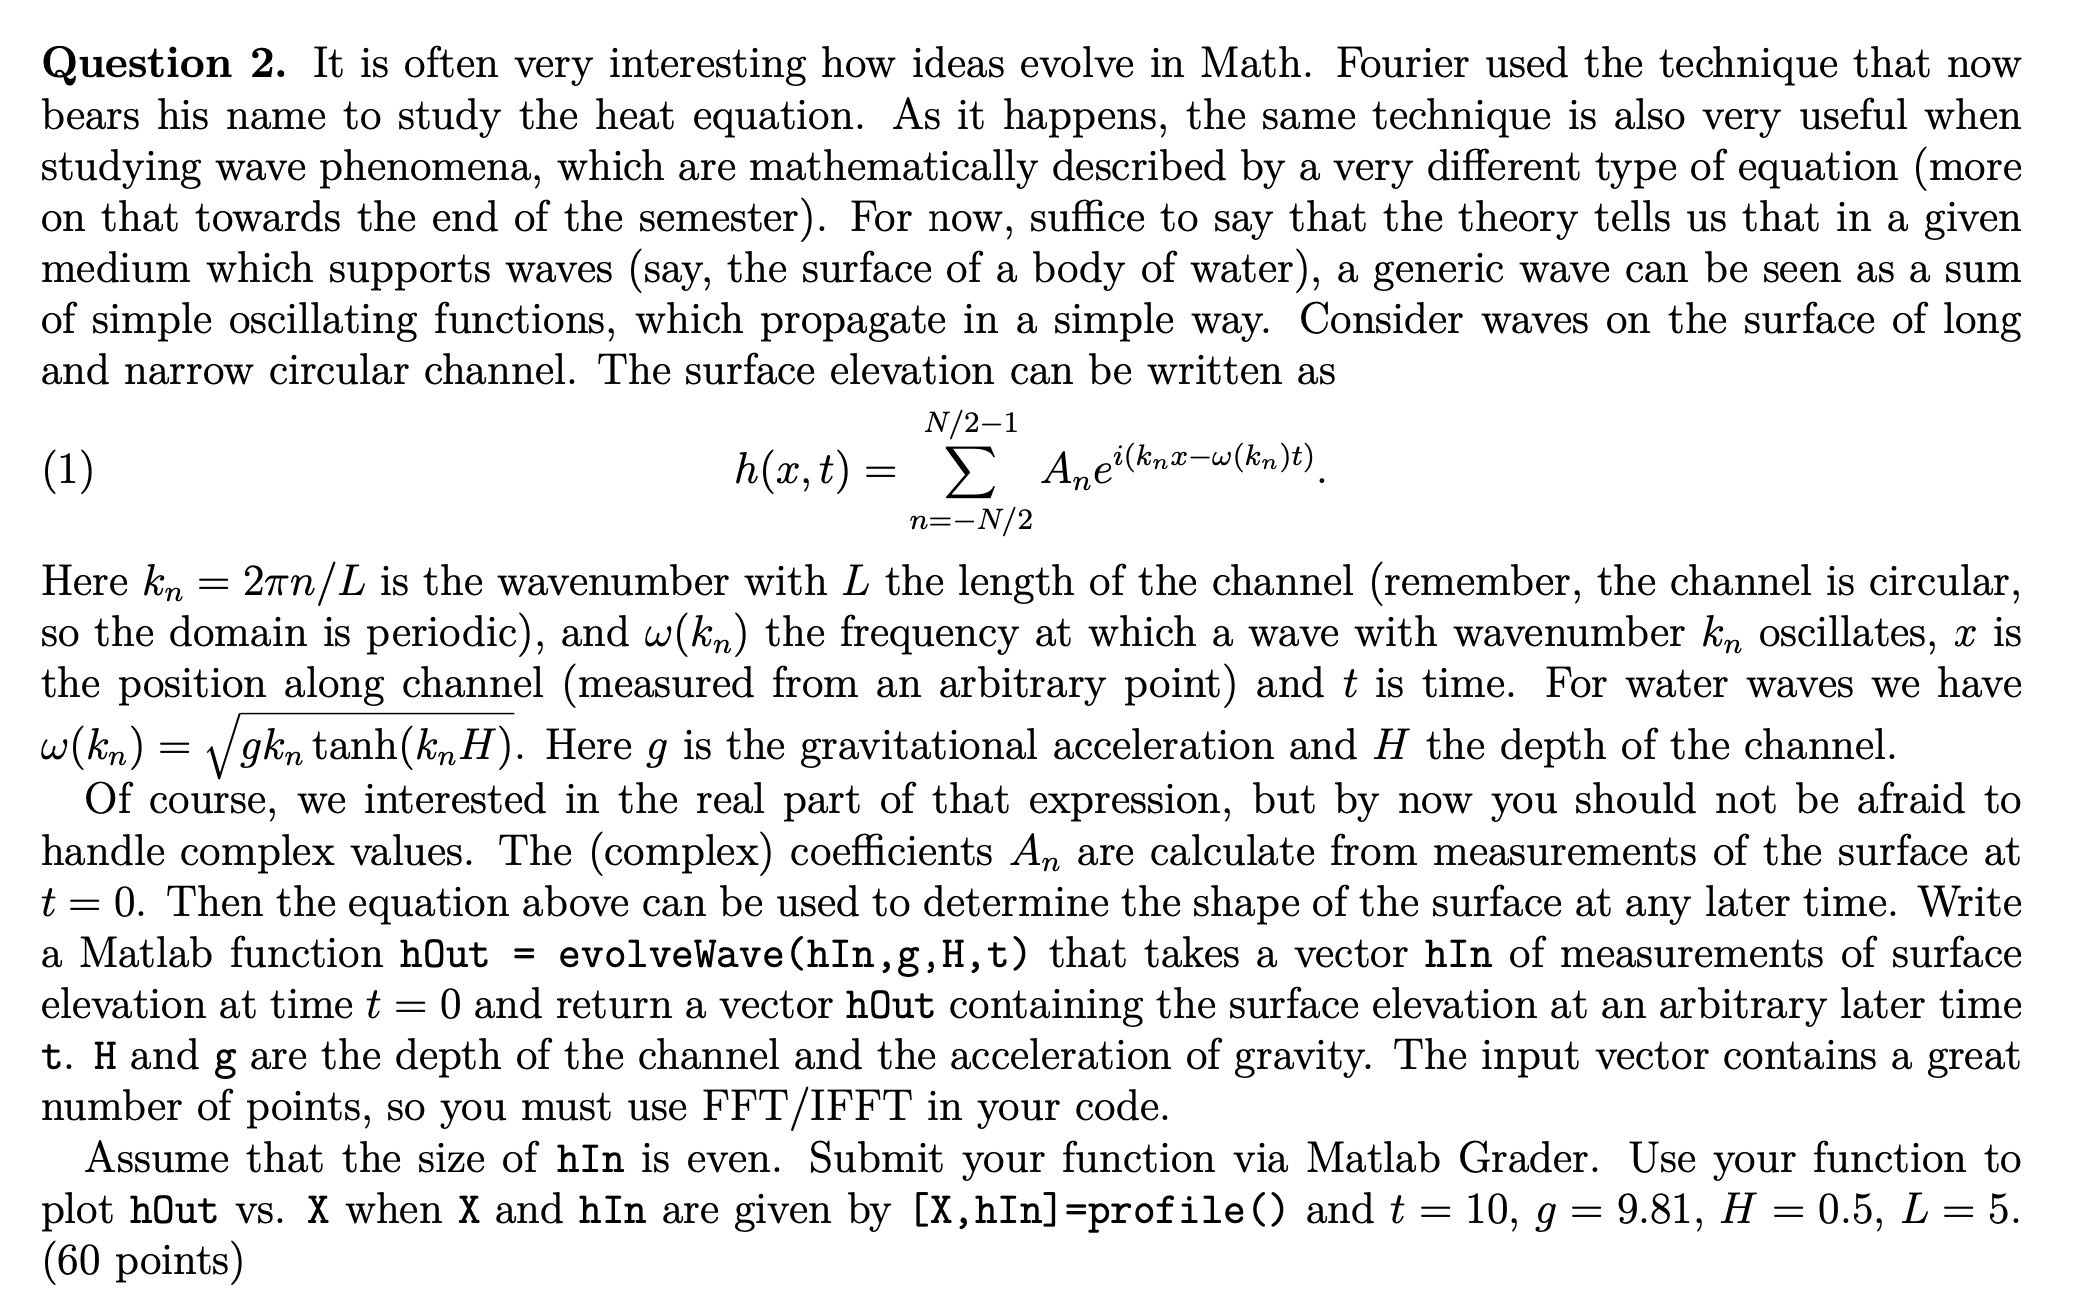 Question 2. It is often very interesting how ideas evolve in Math. Fourier used the technique that now bears